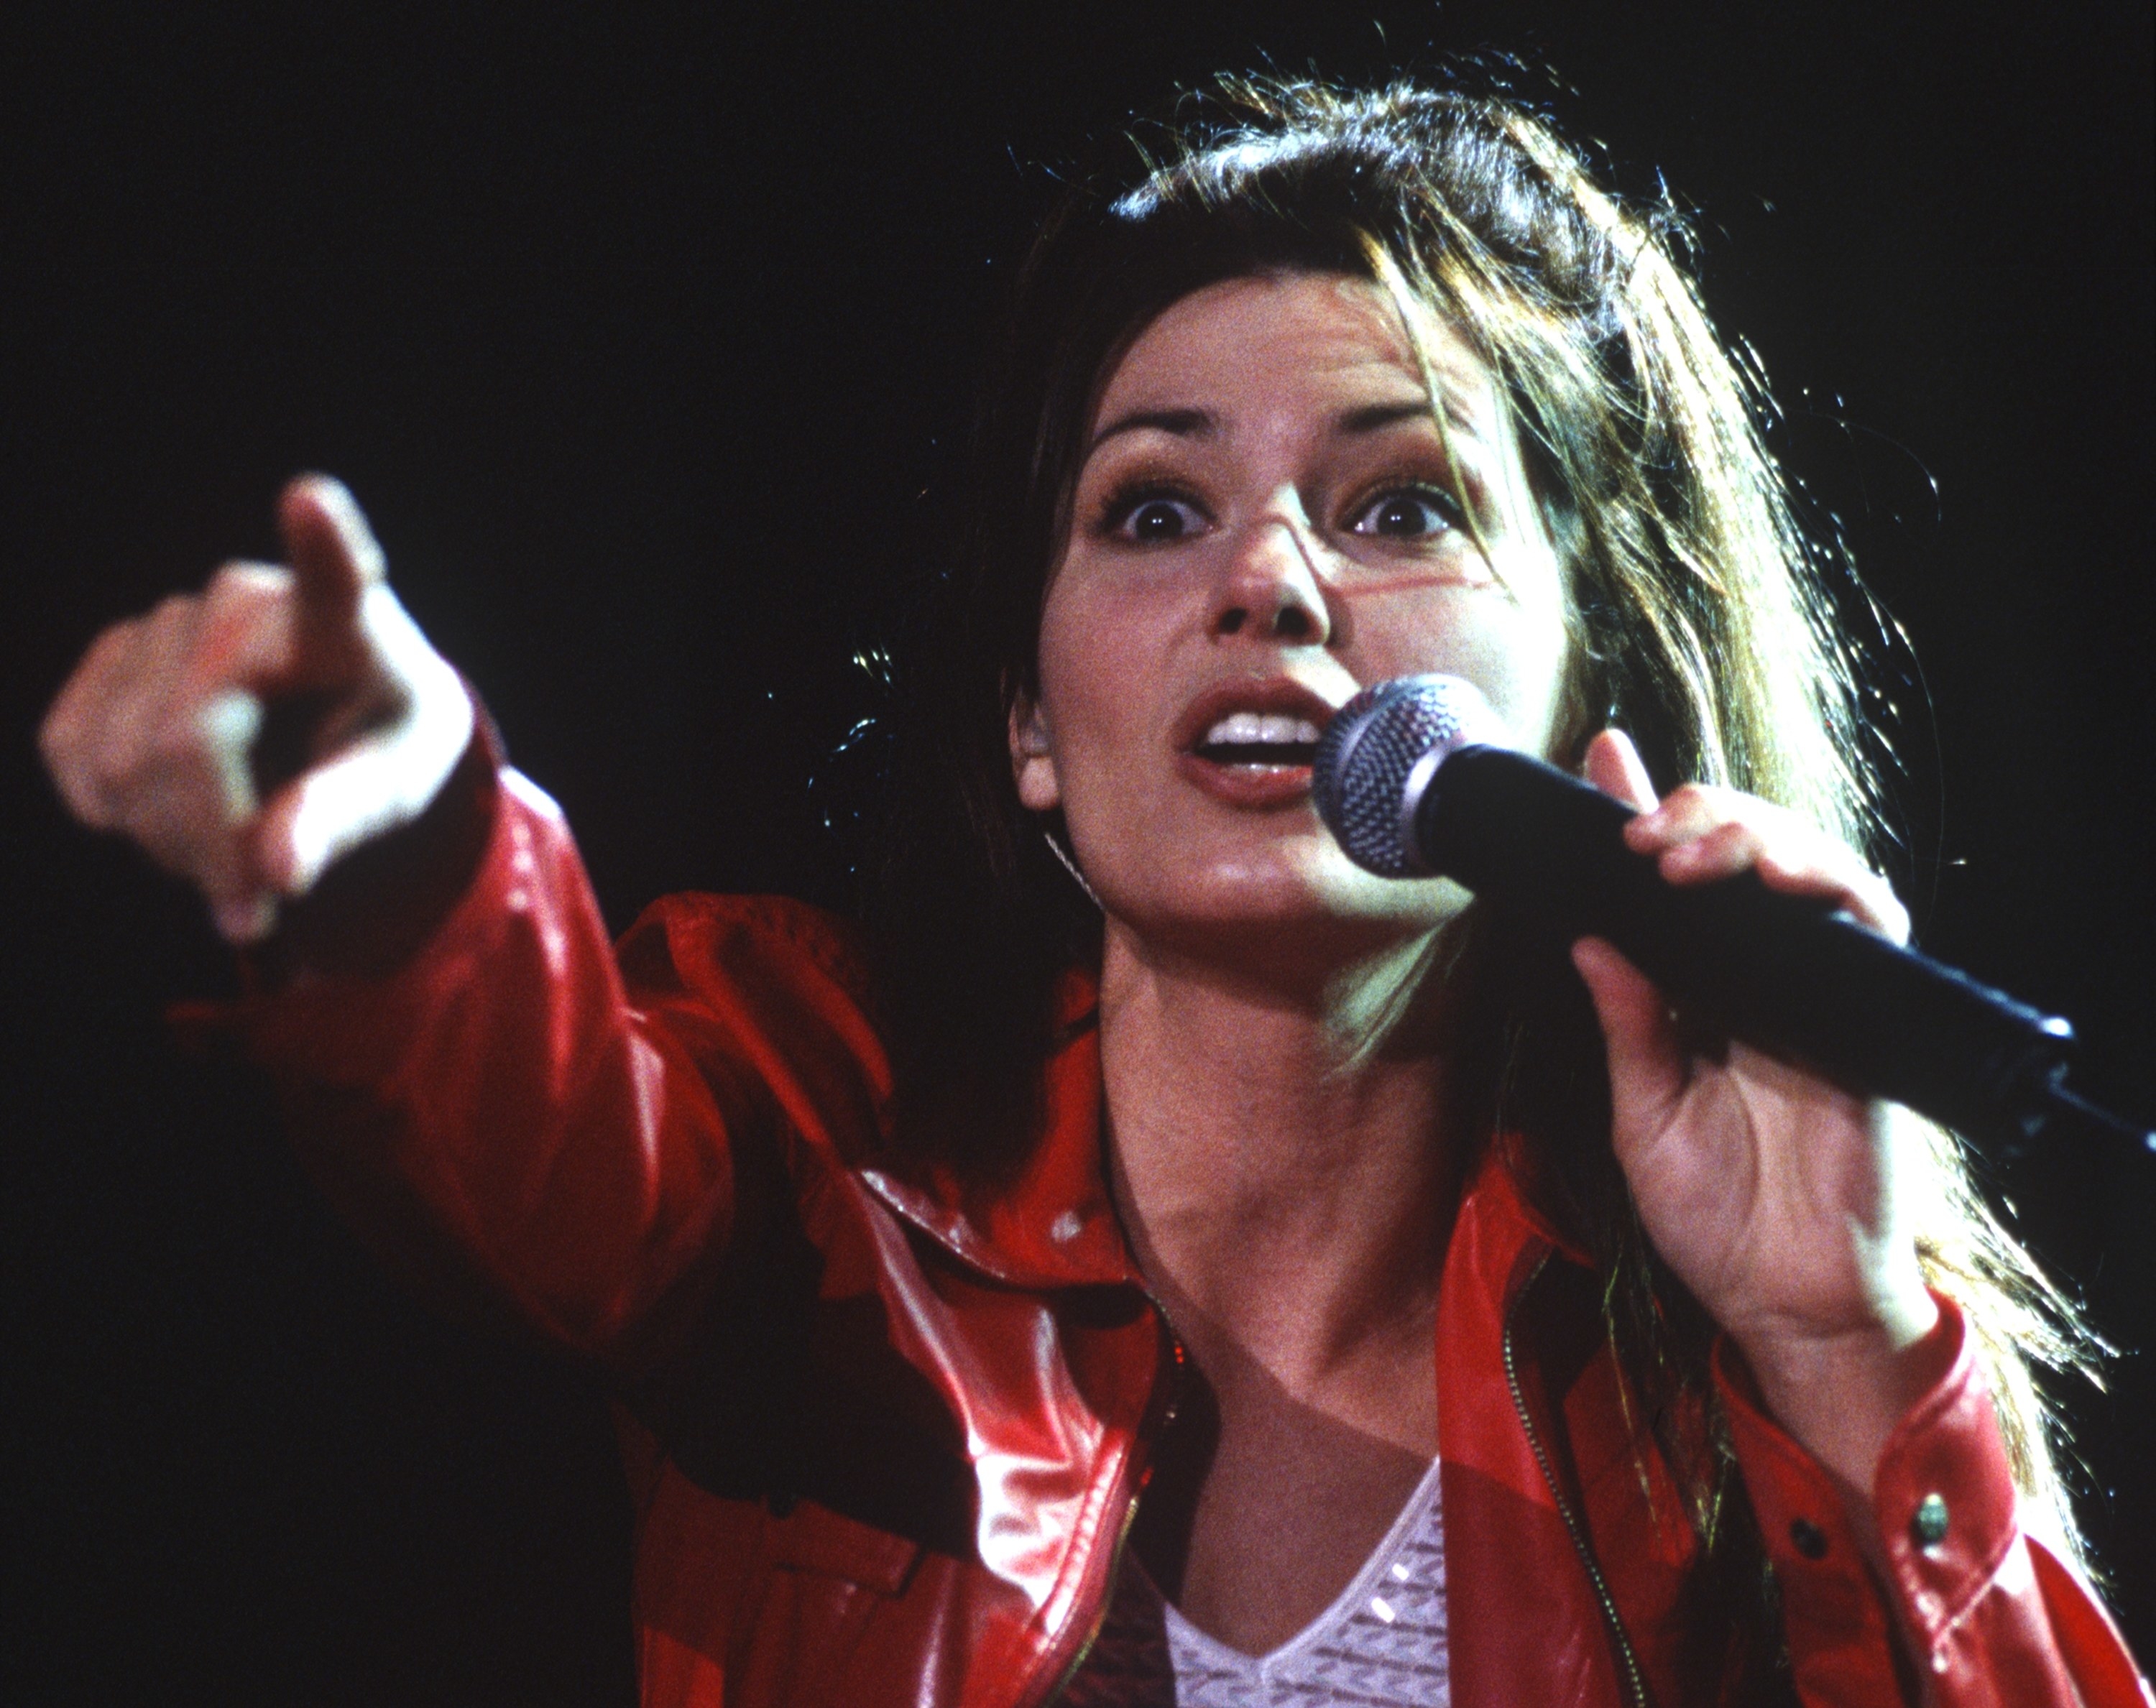 Shania Twain performs at Shoreline Amphitheatre on June 18, 1998 in Mountain View, California